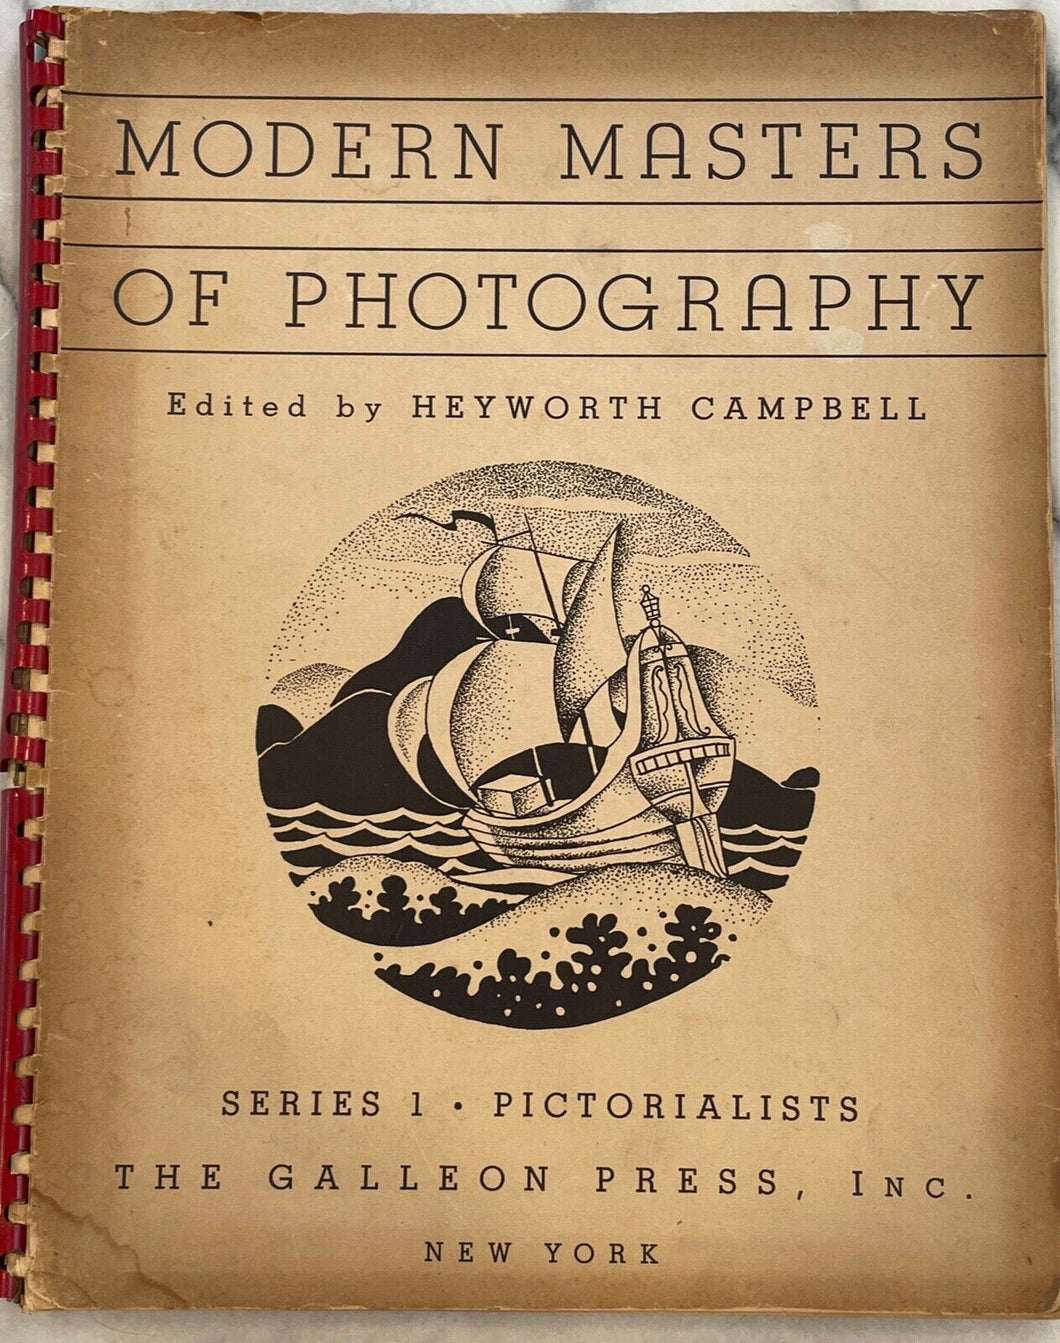 MODERN MASTERS OF PHOTOGRAPHY - PICTORIALISTS - Campbell 1st 1937 - PICTORIALISM